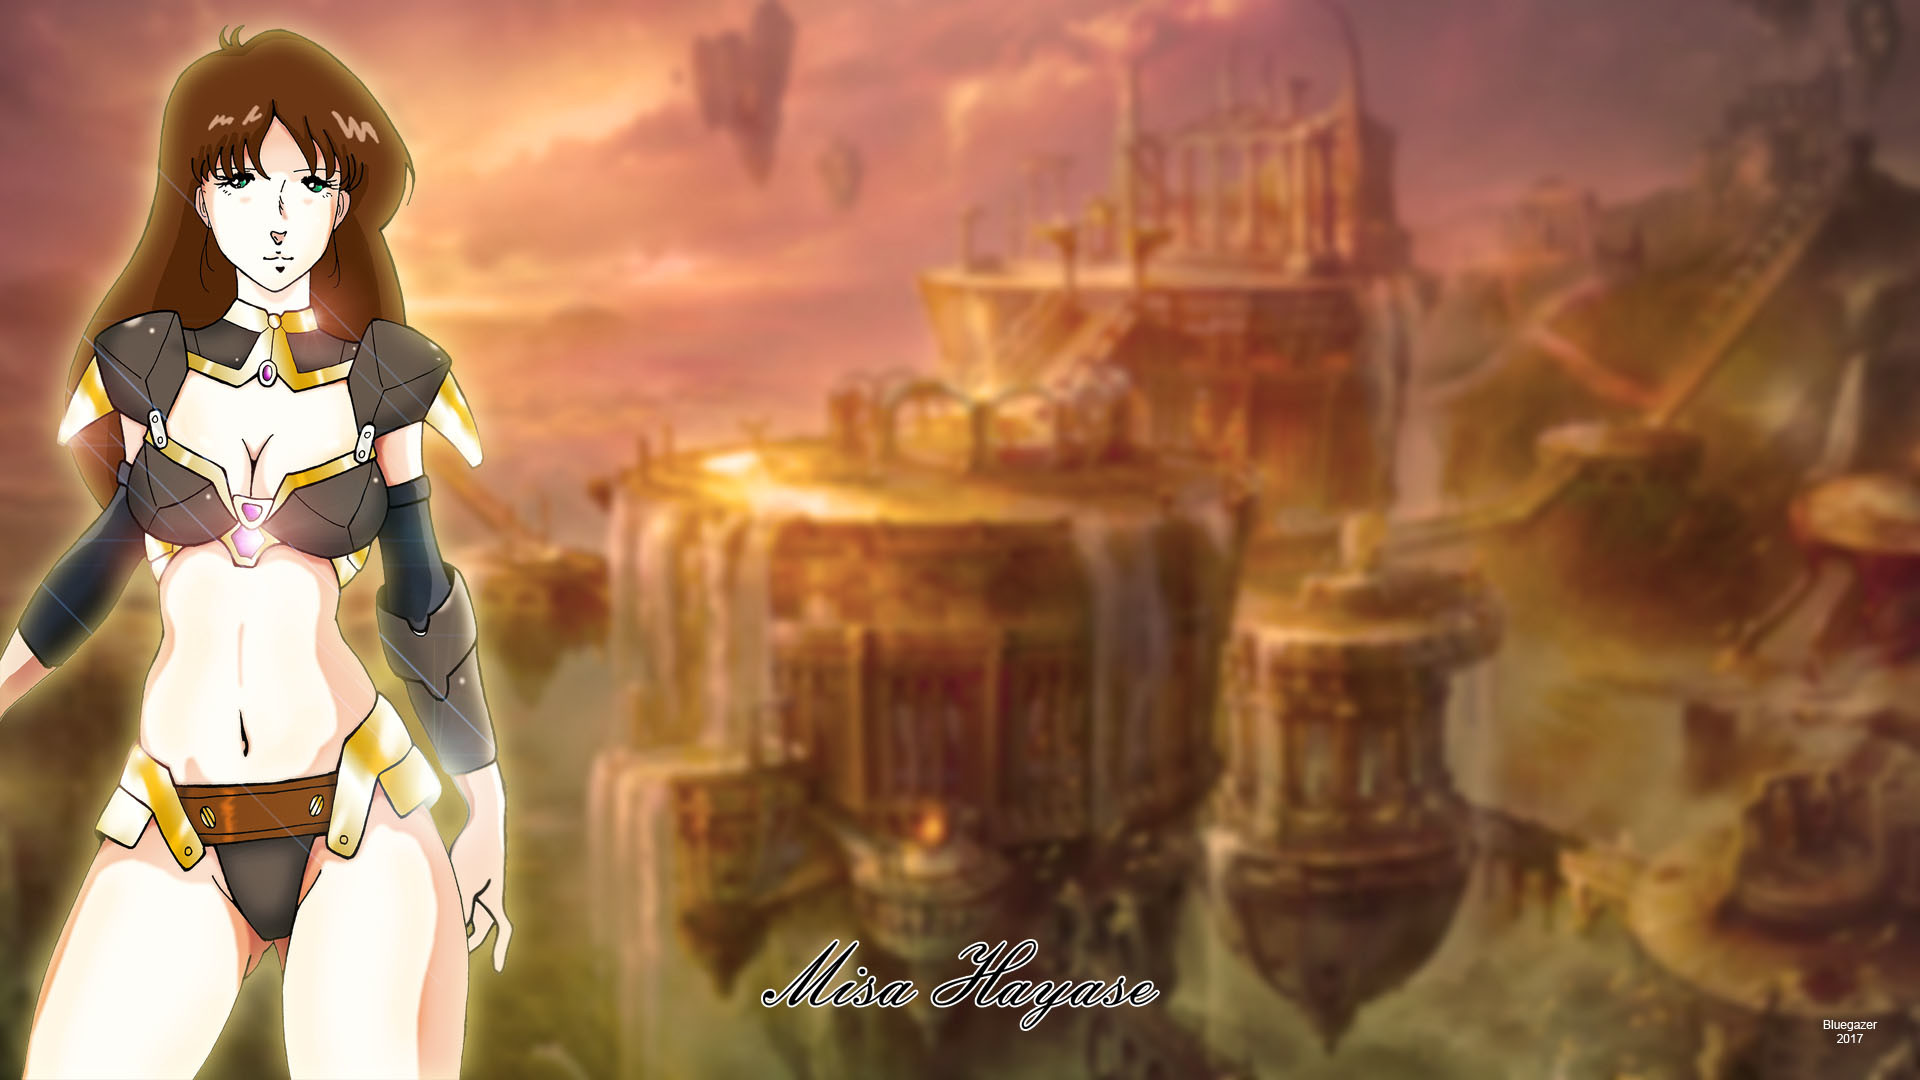 1920x1080 ... Misa Hayase - The Valkyrie - Wallpaper by Neobgzer